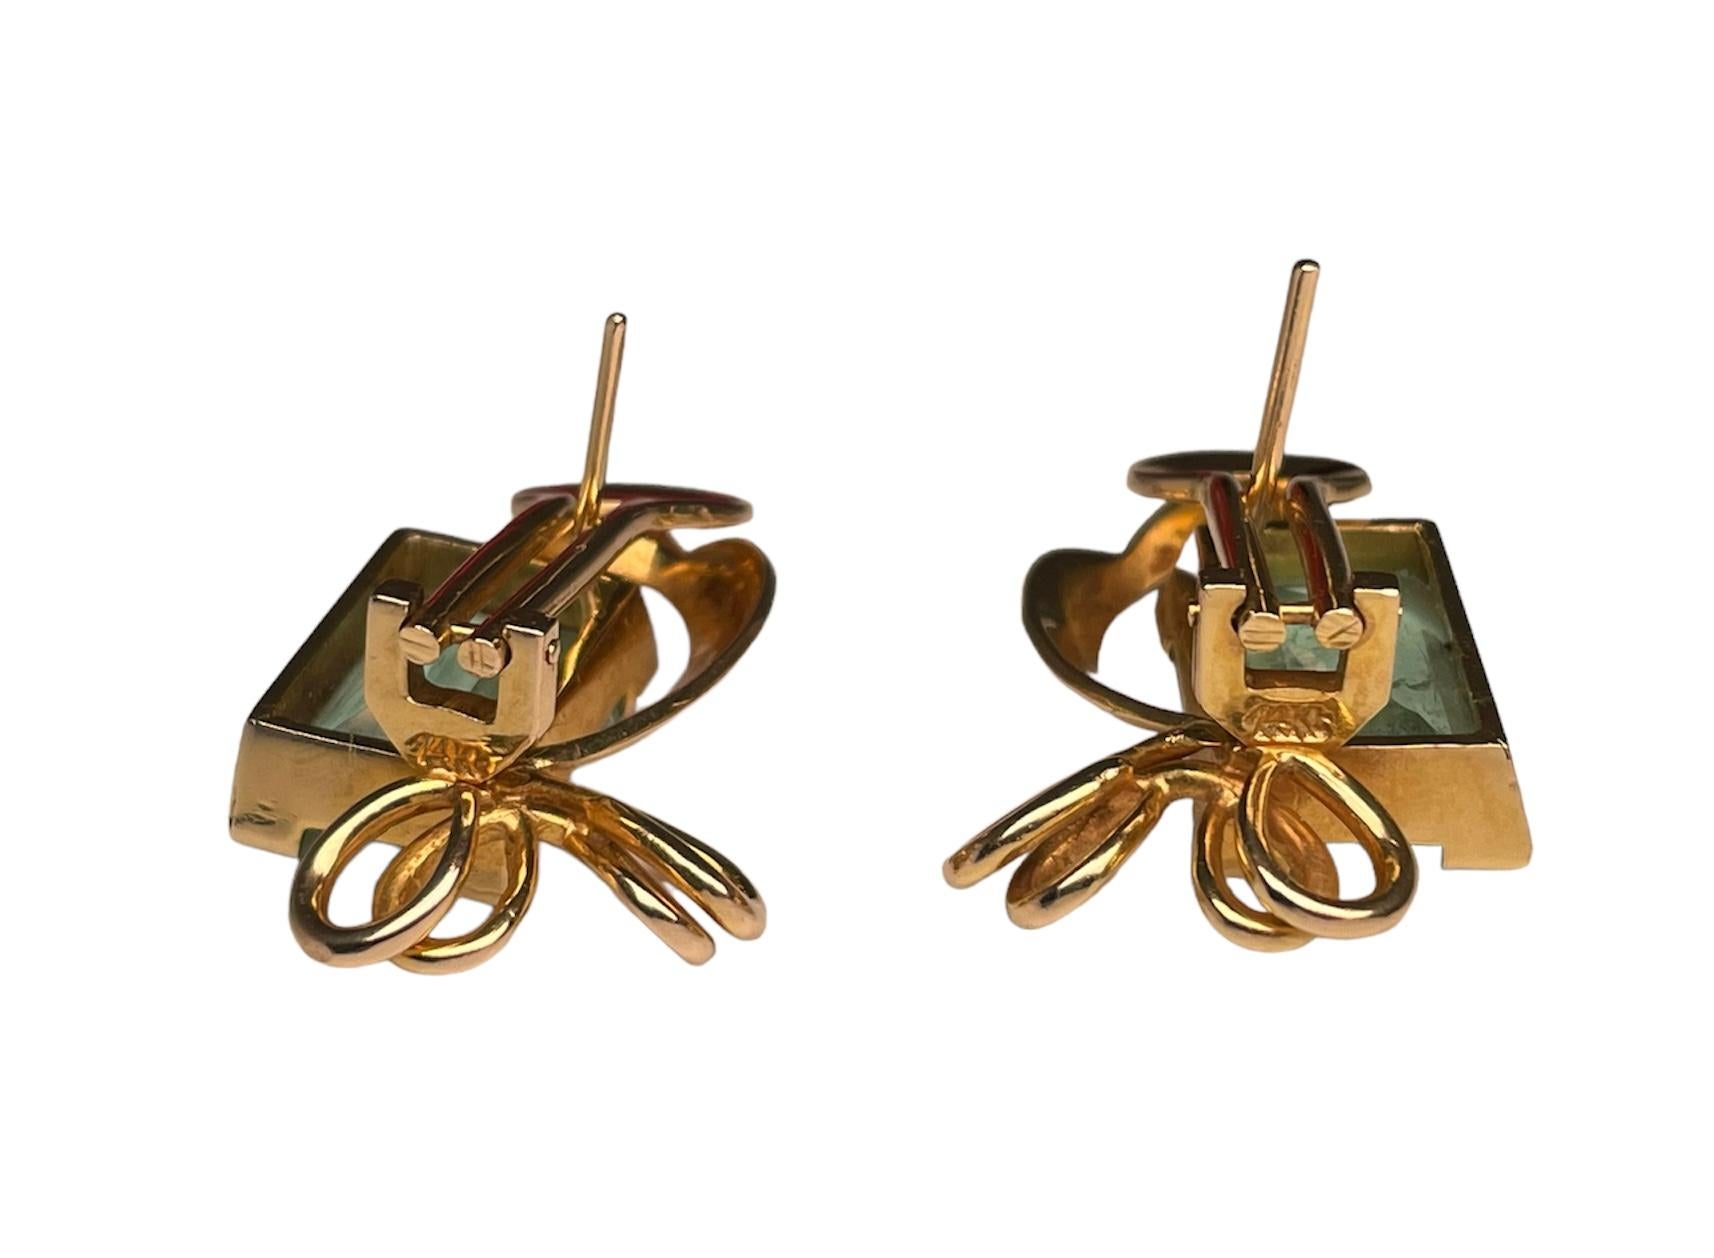 This is a pair of 14k yellow gold emerald earrings. The emeralds have emerald cut. The measurements of one of the emeralds are 14.30 x 9.59 x 5.40 mm and its weights is 4.81 ct. The measurements of the second one are 13.99 x 9.19 x 5.74 mm and its